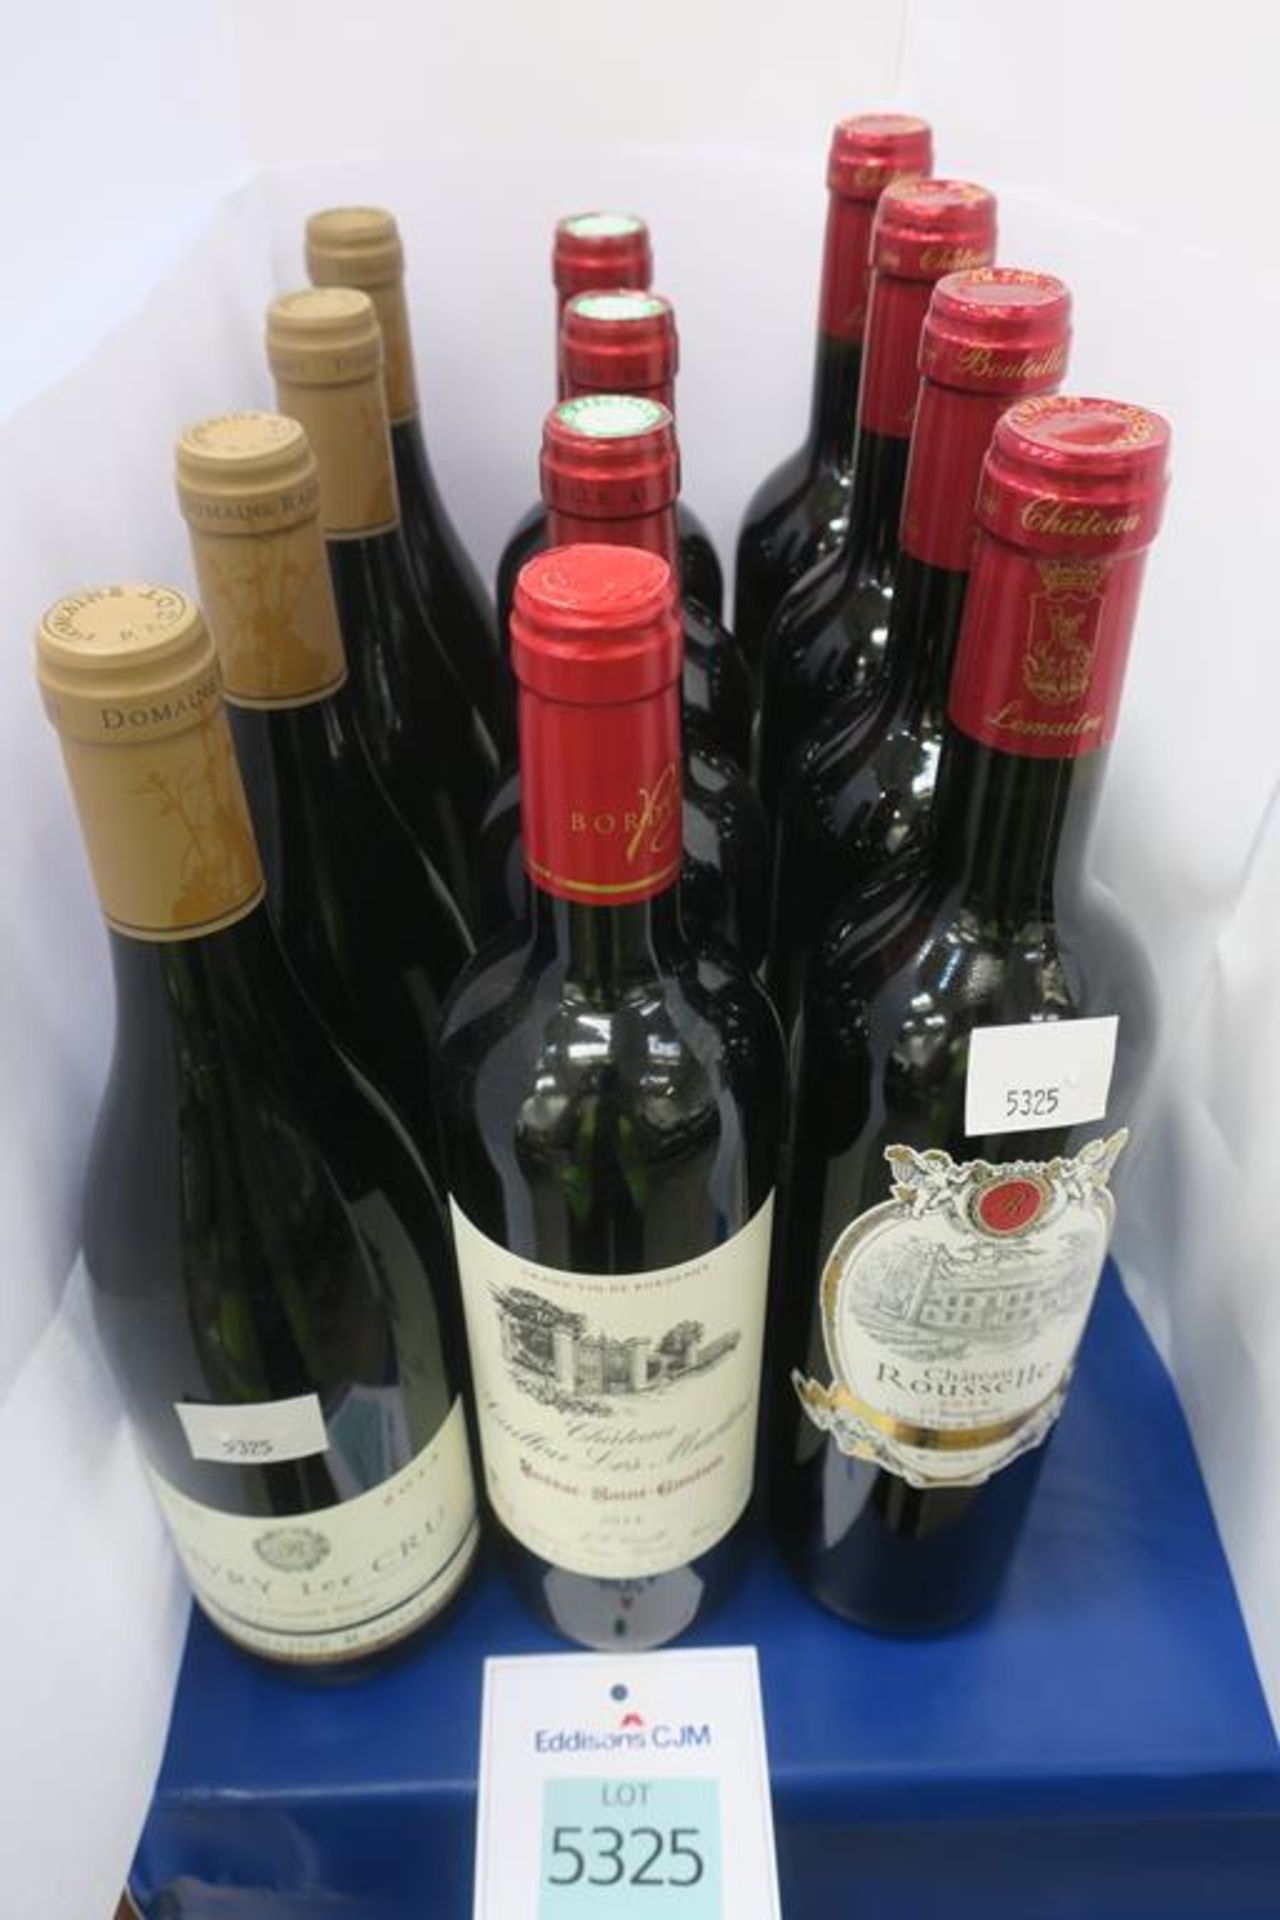 Domaine Ragot White Wine, Chateau Cardinal Red Wine and Chateau Rousselle Red Wine